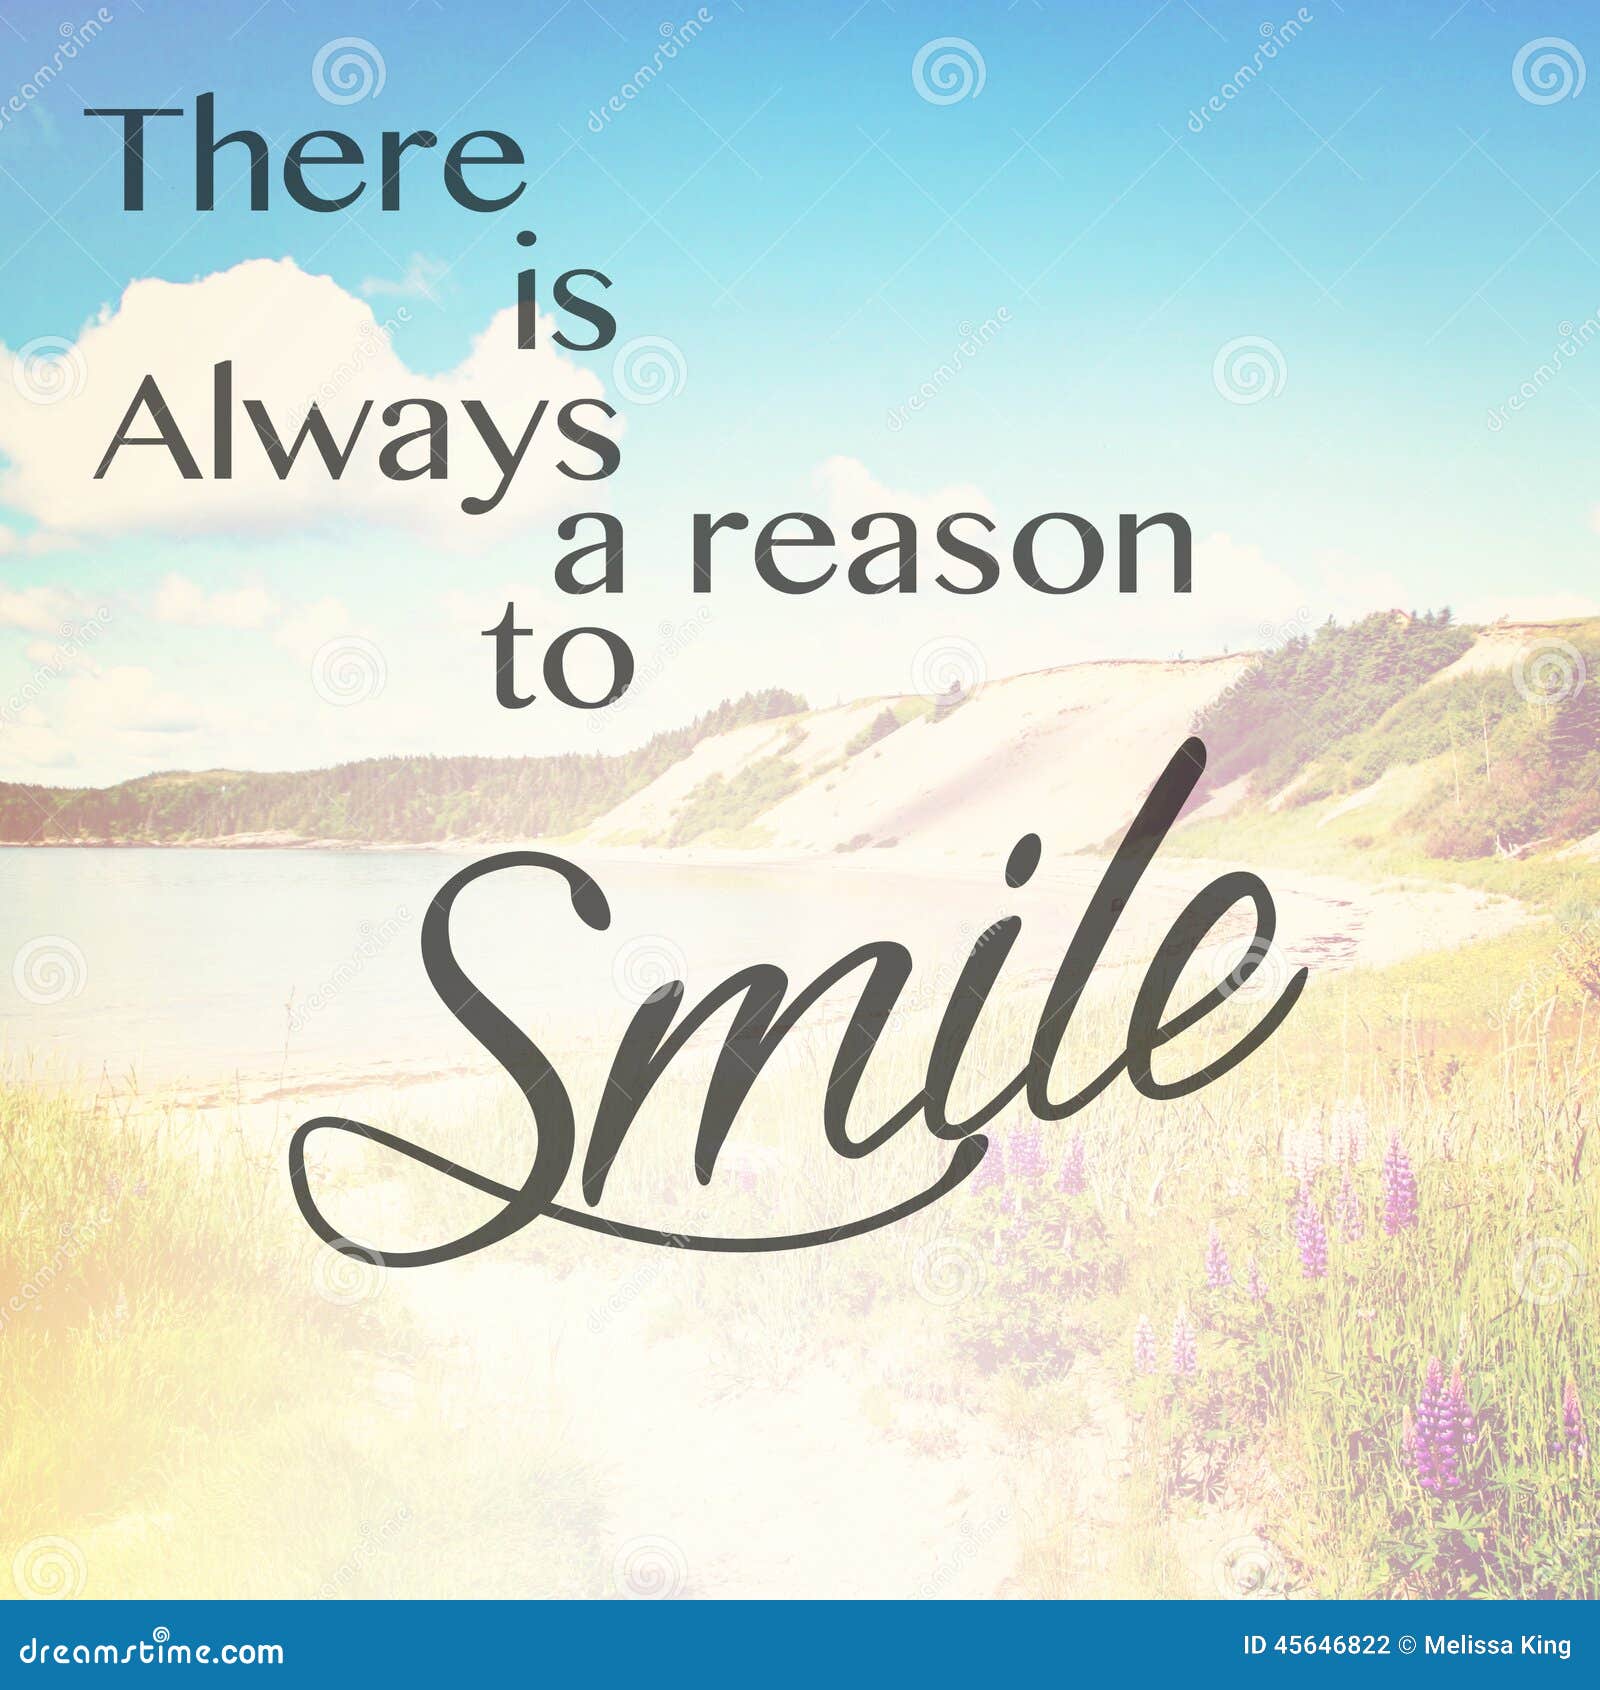 there is always reason to smile